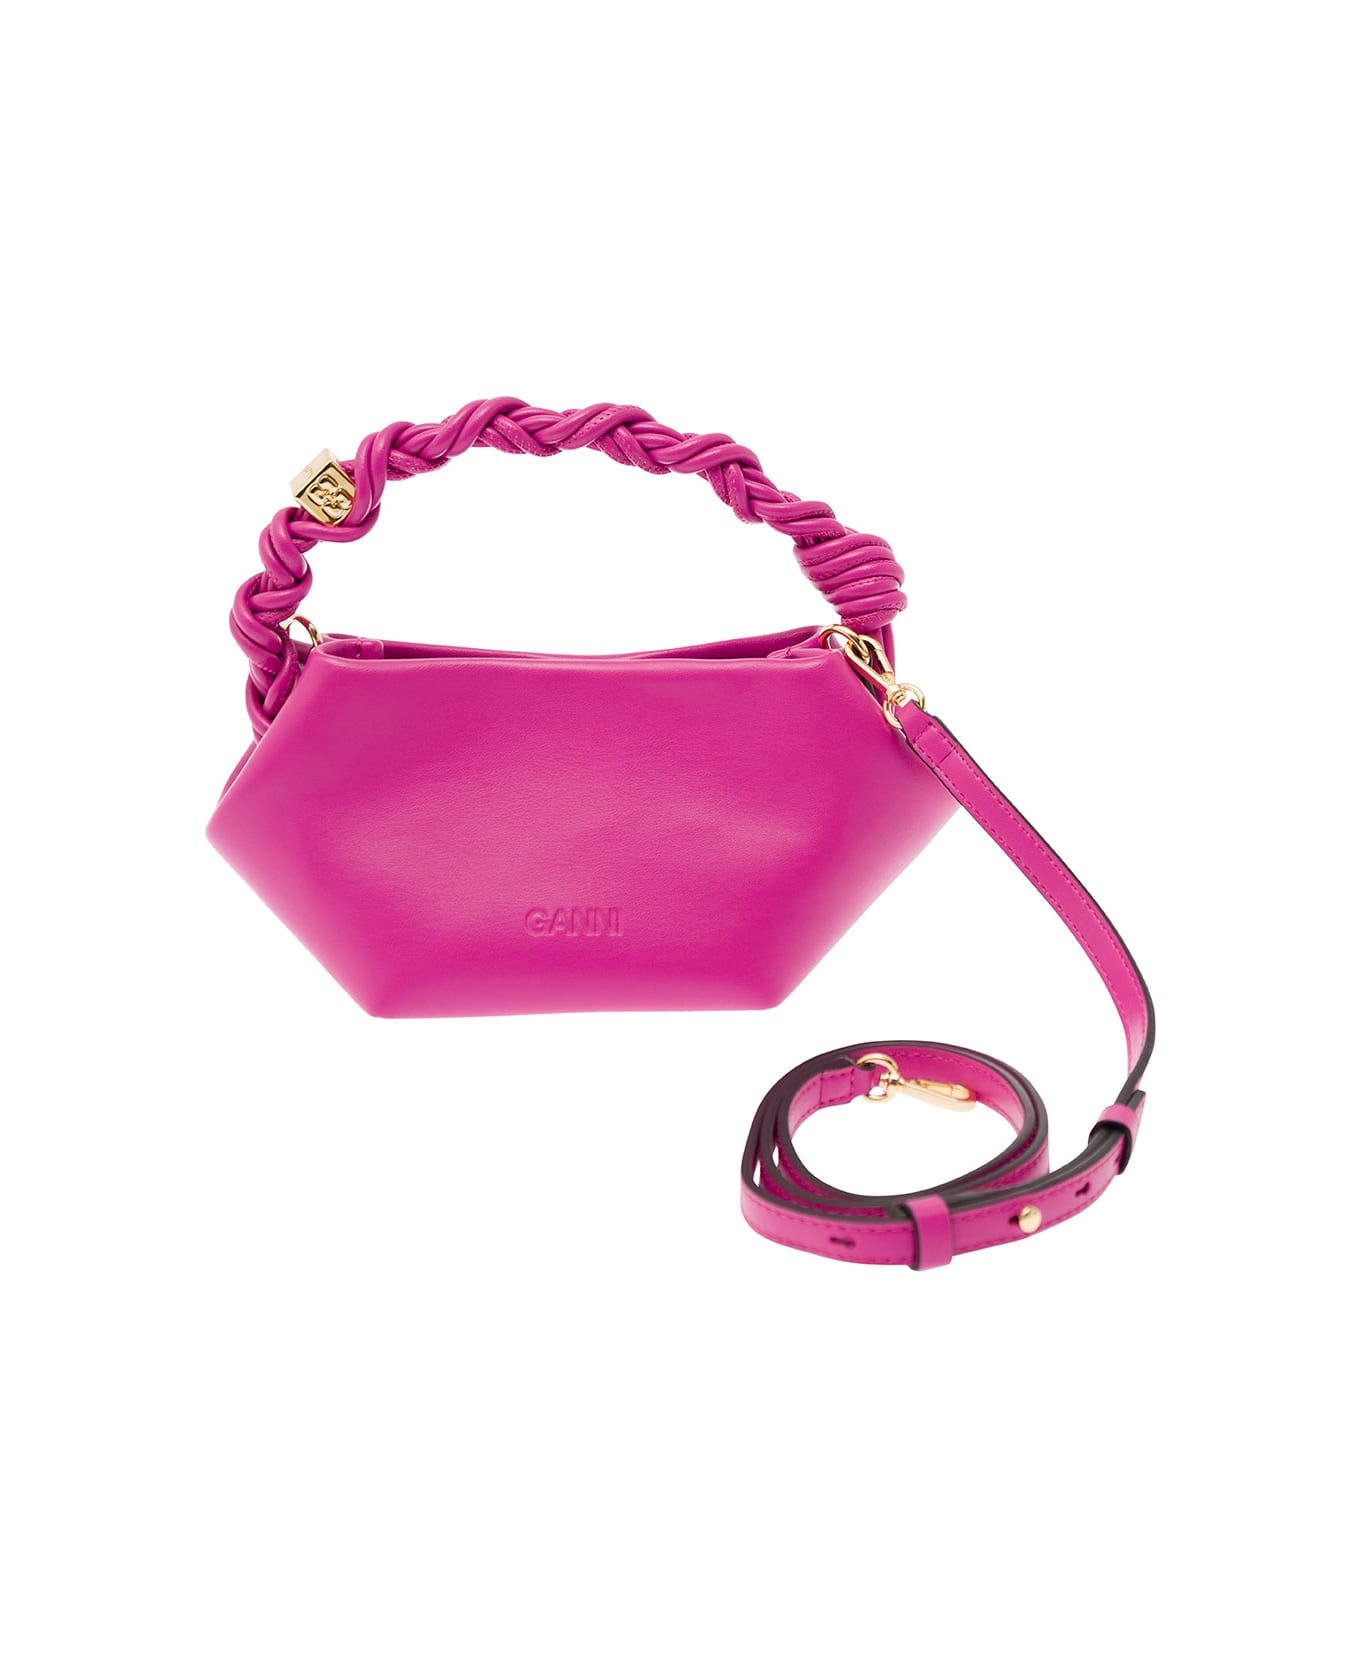 Ganni 'bou' Fuchsia Shoulder Bag With Knotted Handle In Leather Woman - Pink